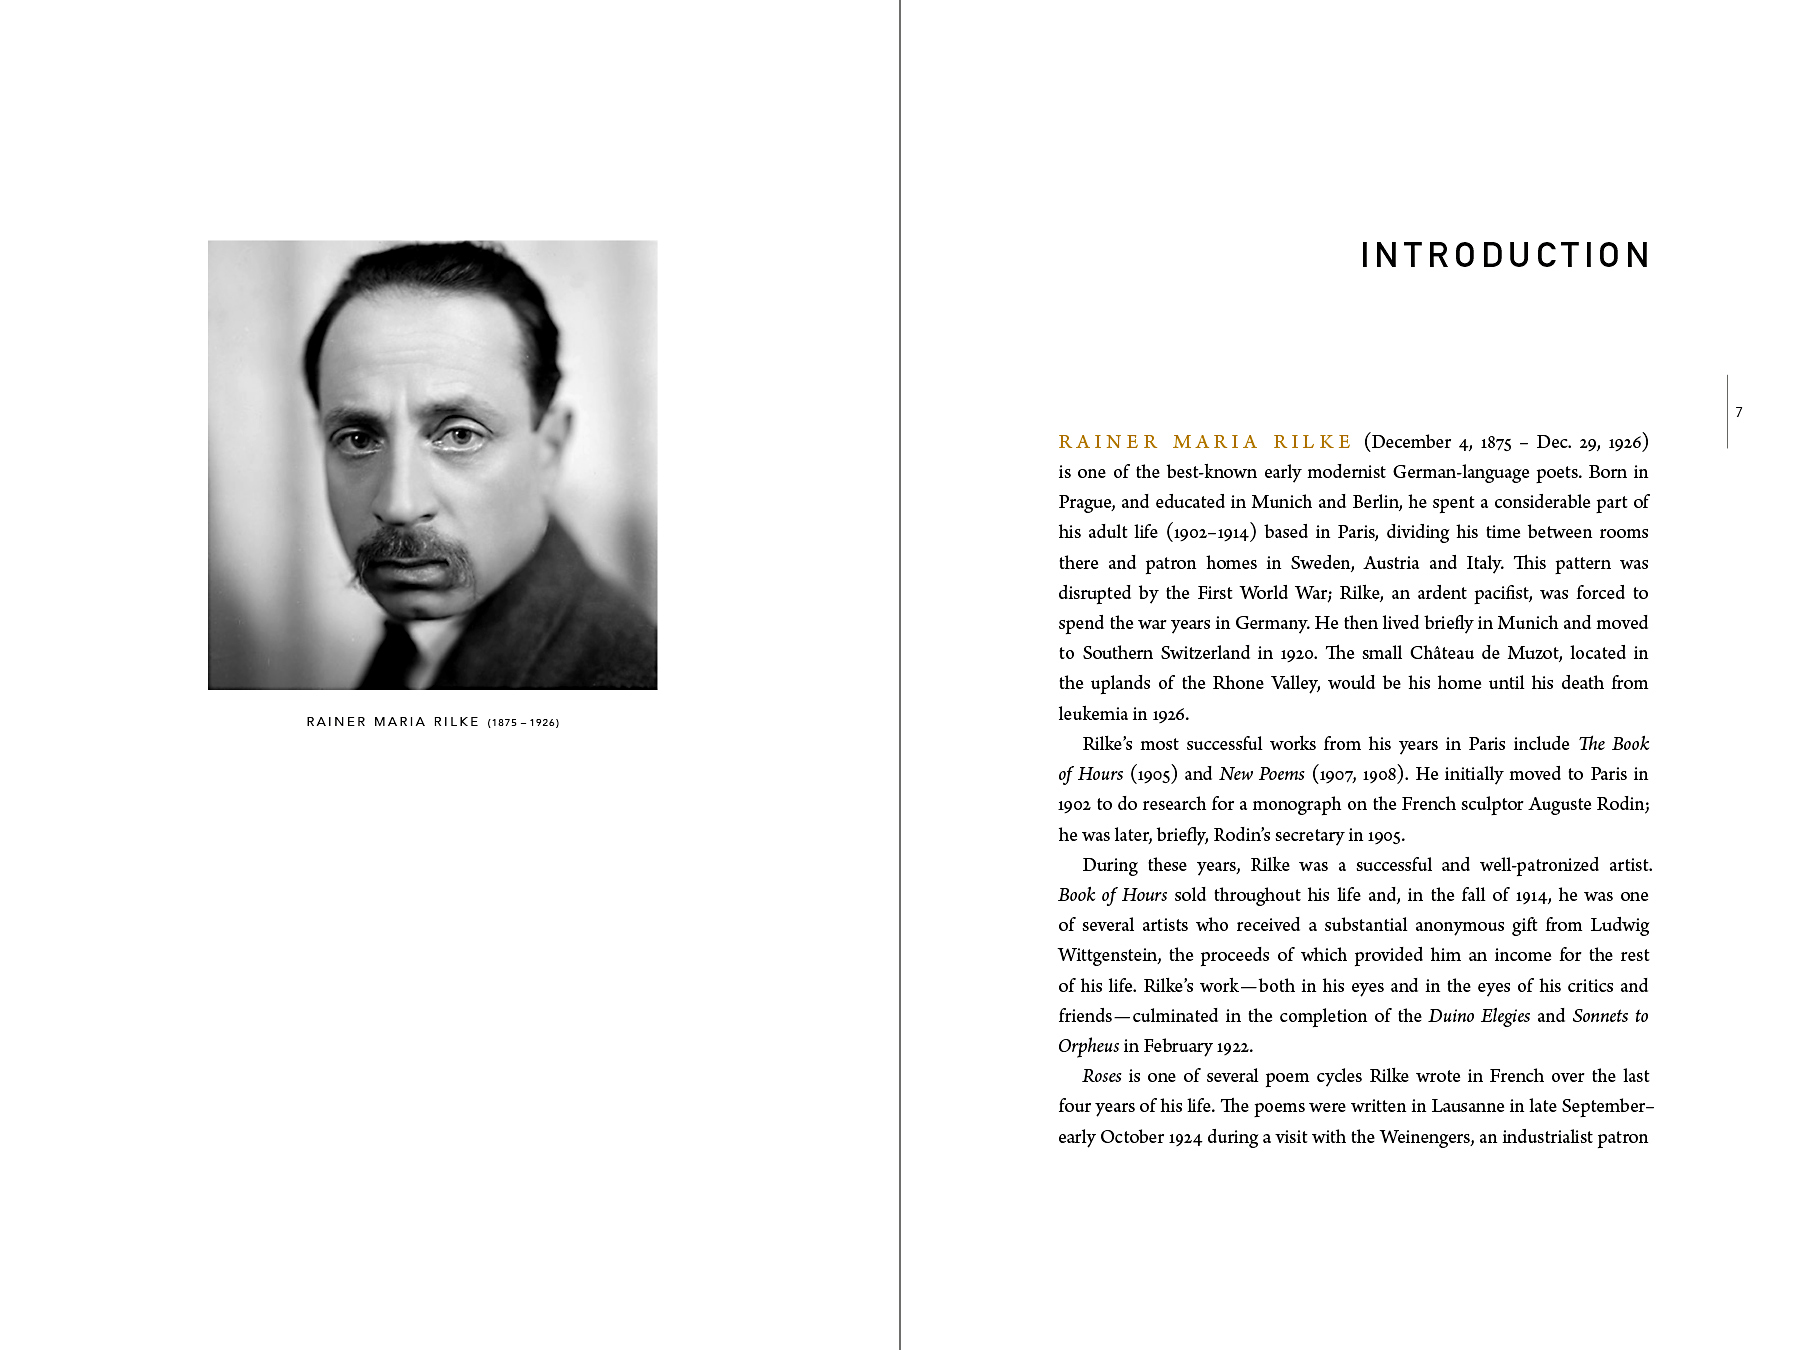  Introduction spread. Rilke looks at us from another century as we read about him. 